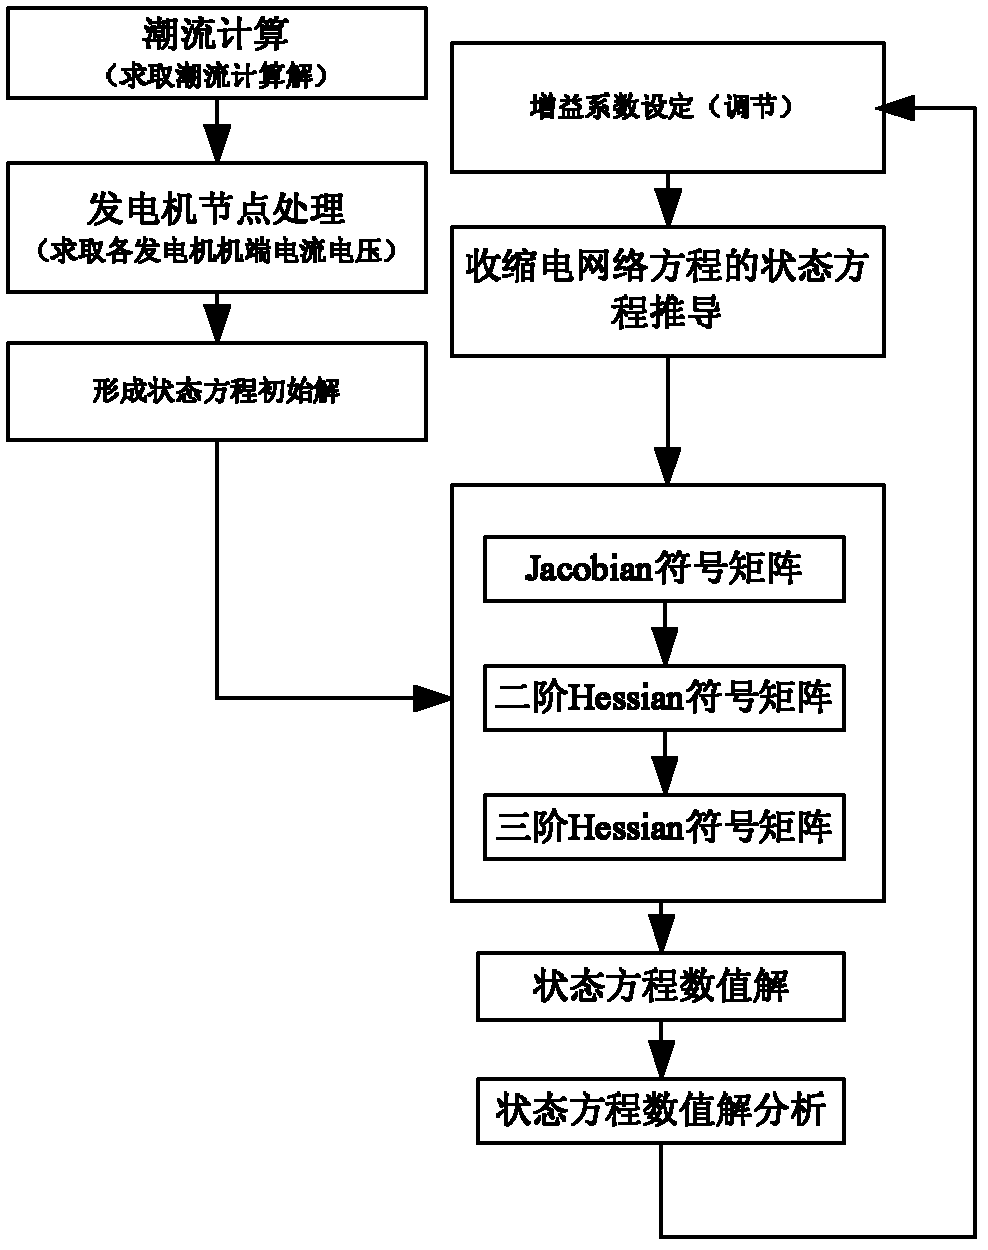 3-order normal form low-interference analysis method of SVC (Static Var Compensator) and TCSC (Thyristor Controlled Series Compensator) embedded system